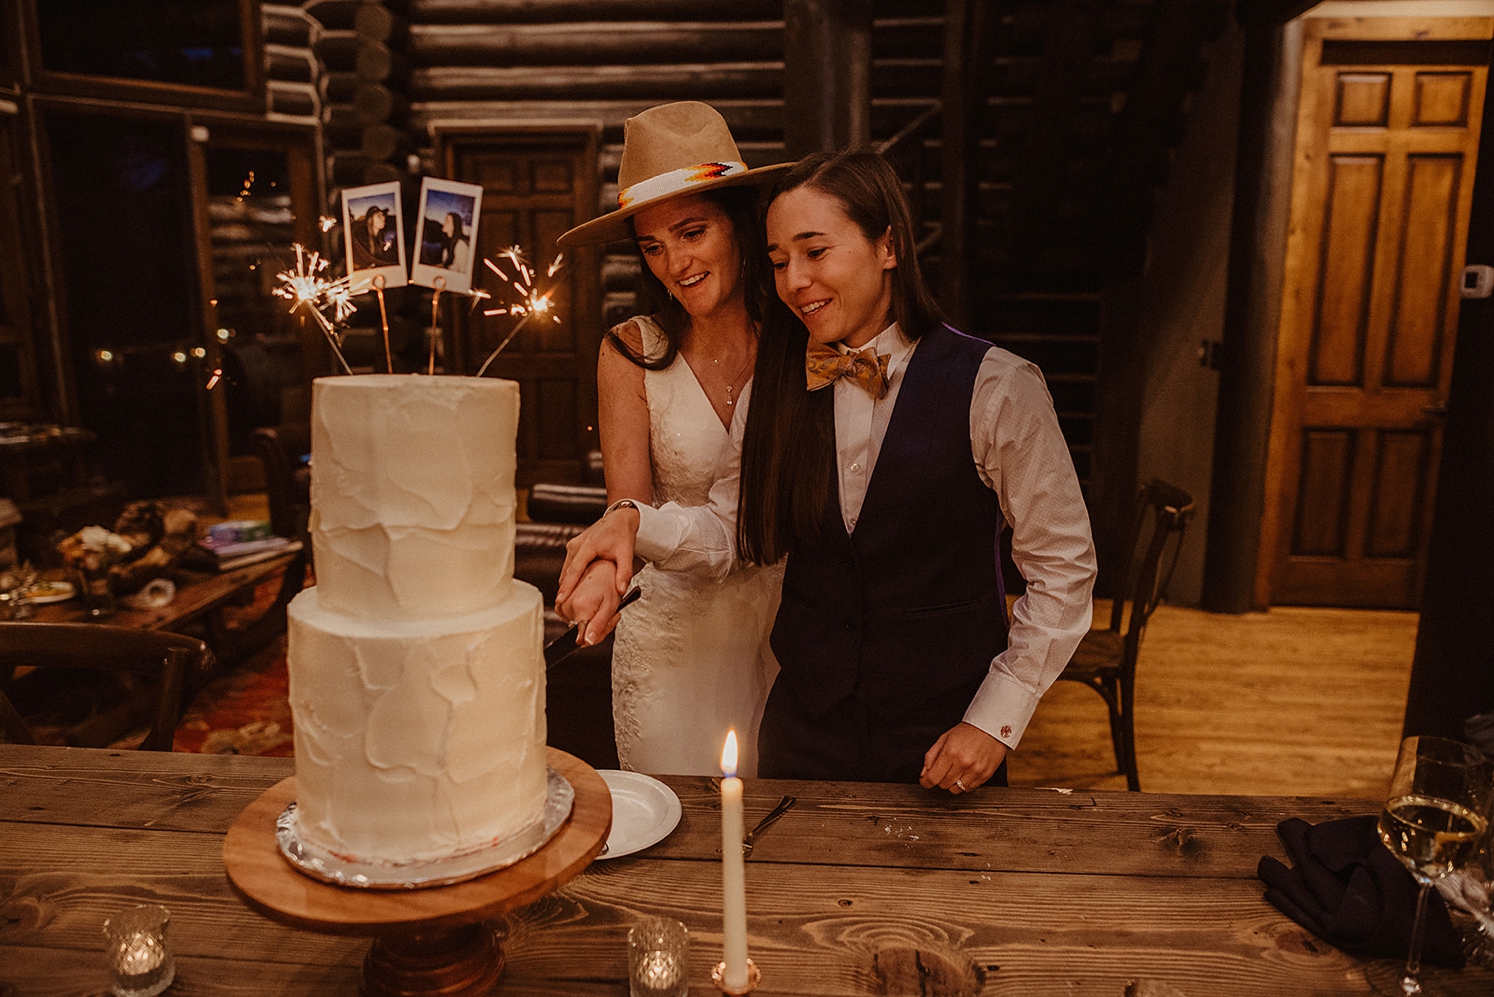 Partners cutting wedding cake with polaroids and sparkers on top of cake | McArthur Weddings and Events